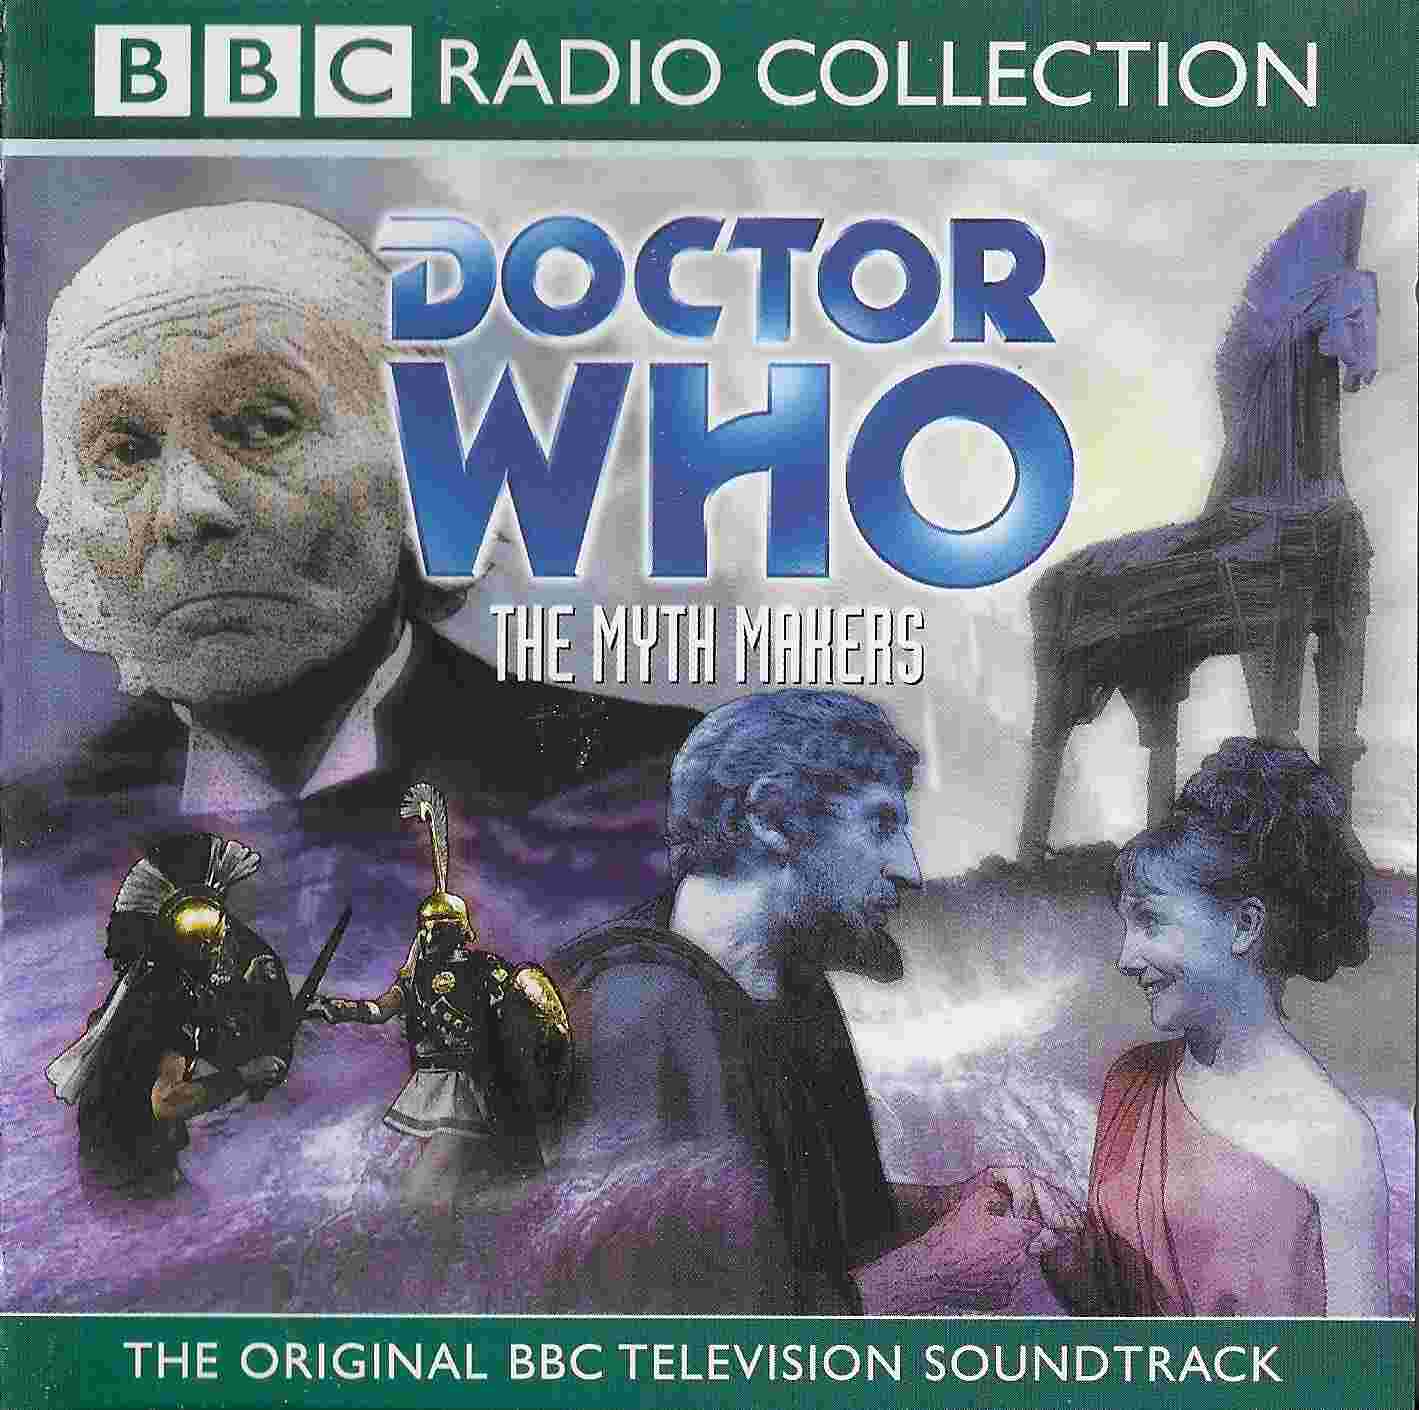 Picture of Doctor Who - The myth makers by artist Donald Cotton from the BBC cds - Records and Tapes library